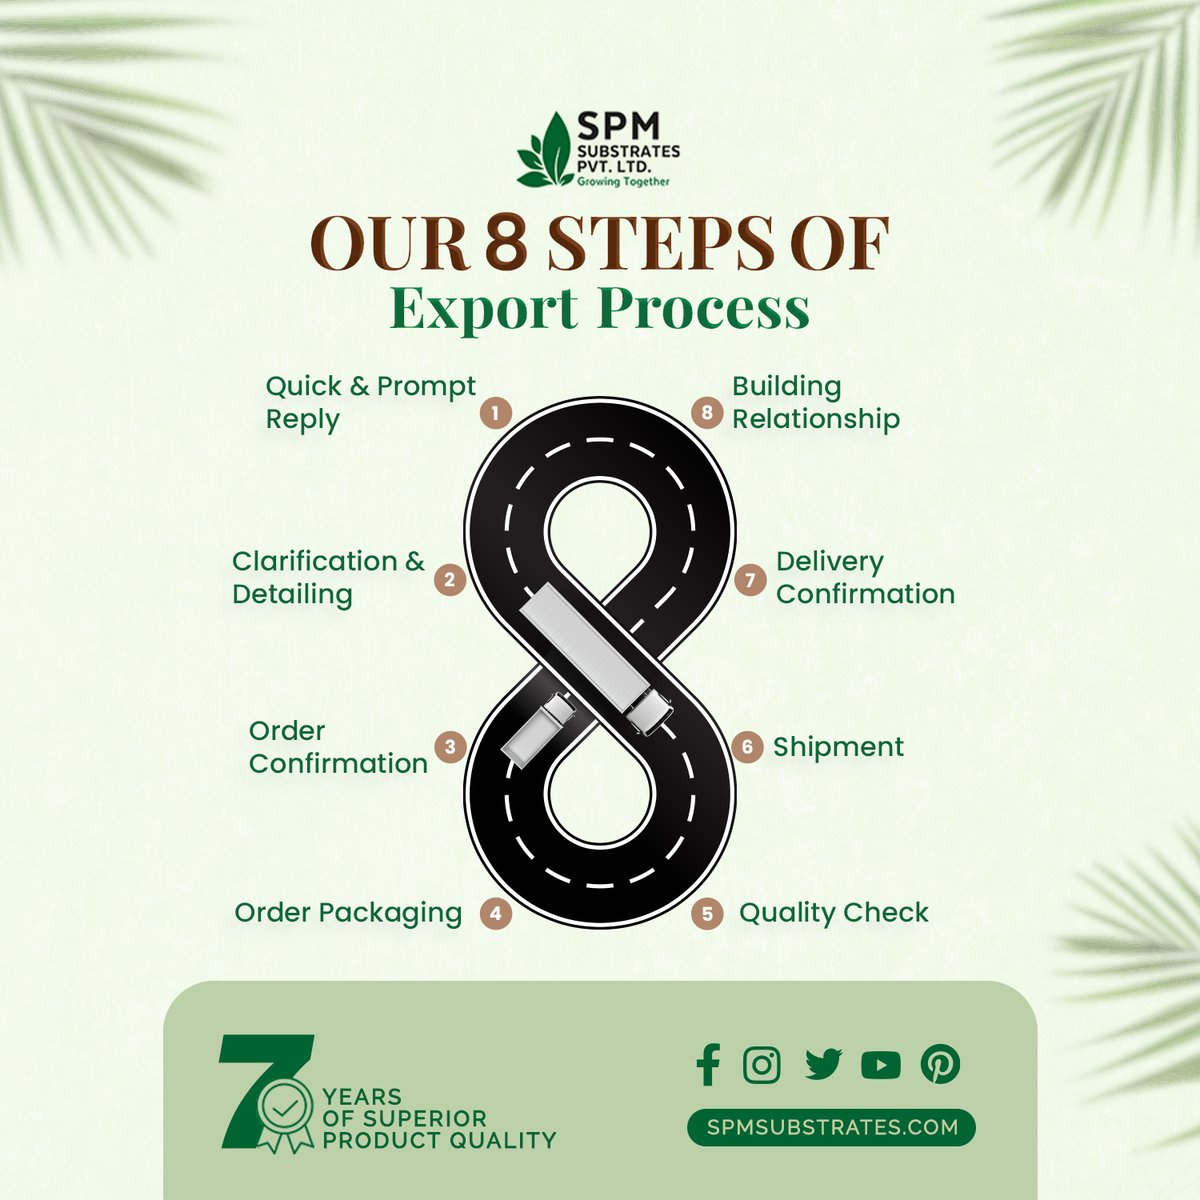 You know what’s the success of SPM Substrates is!

It’s the process; we ensure that every process is done perfectly!

Visit us via bio @SPM_Substrates  to get quality cocopeat.

#spmsubstrates #cocopeat #export #exportingworldwide #packaging #delivery